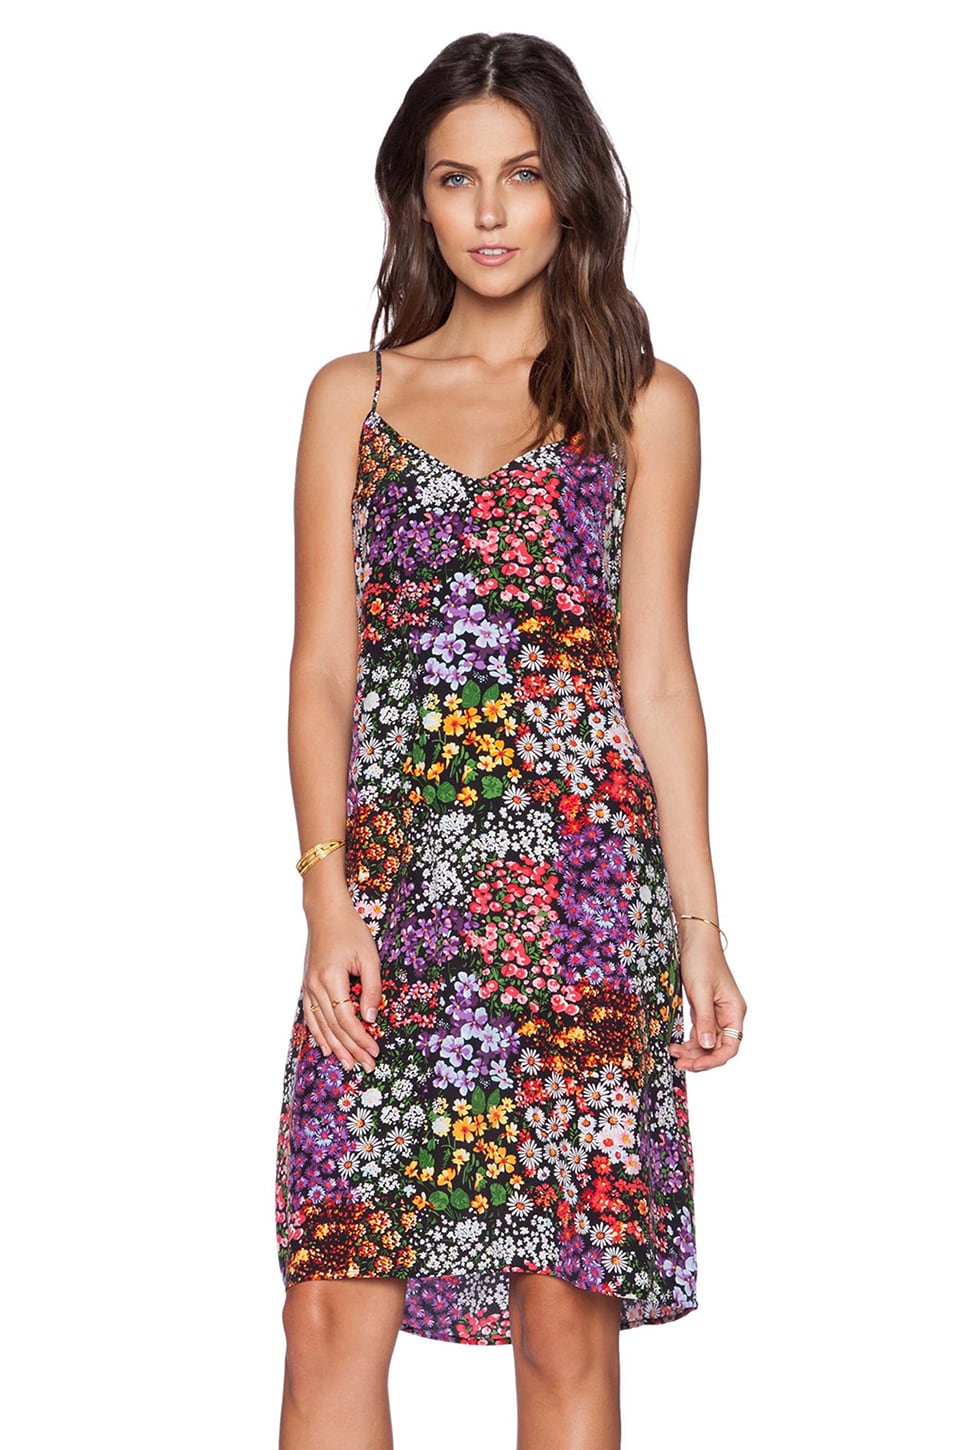 Equipment Layla Lively Floral Print Dress in Bloom Multi | REVOLVE